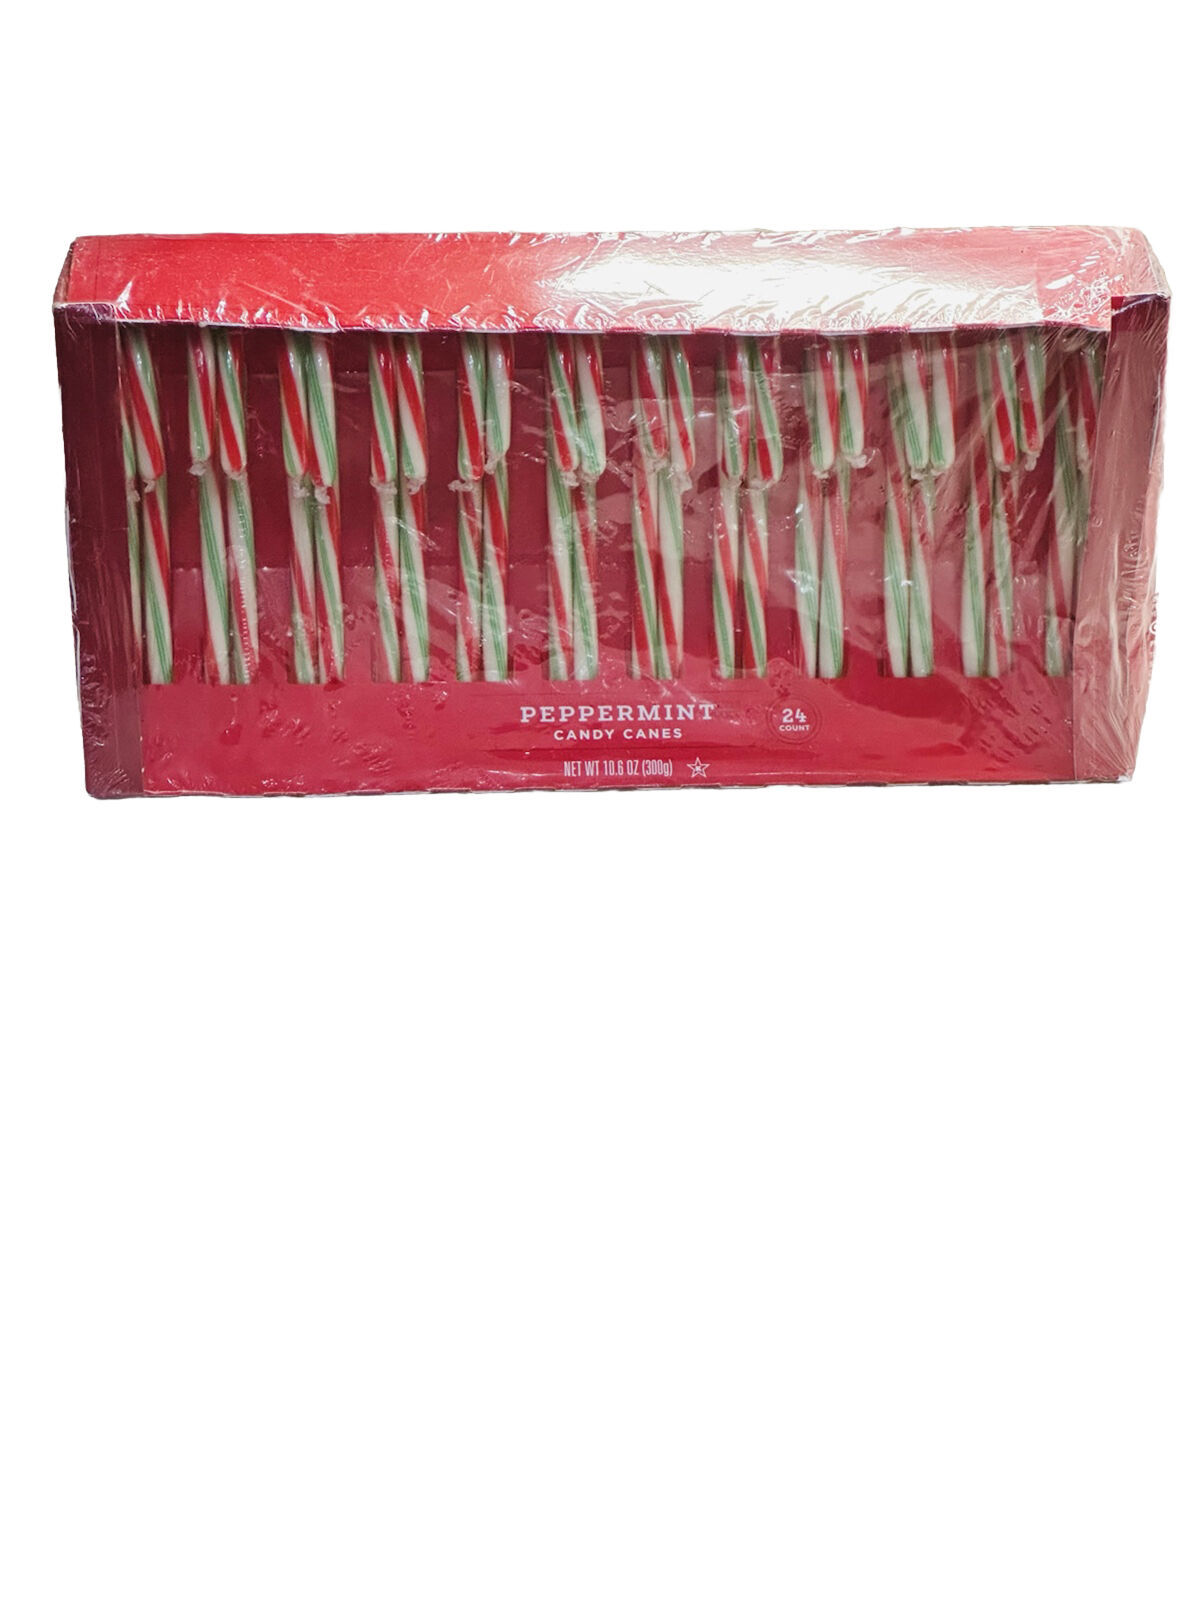 Primary image for Wondershop Papermint Candy Canes: 10.6oz(300gm)24ct.